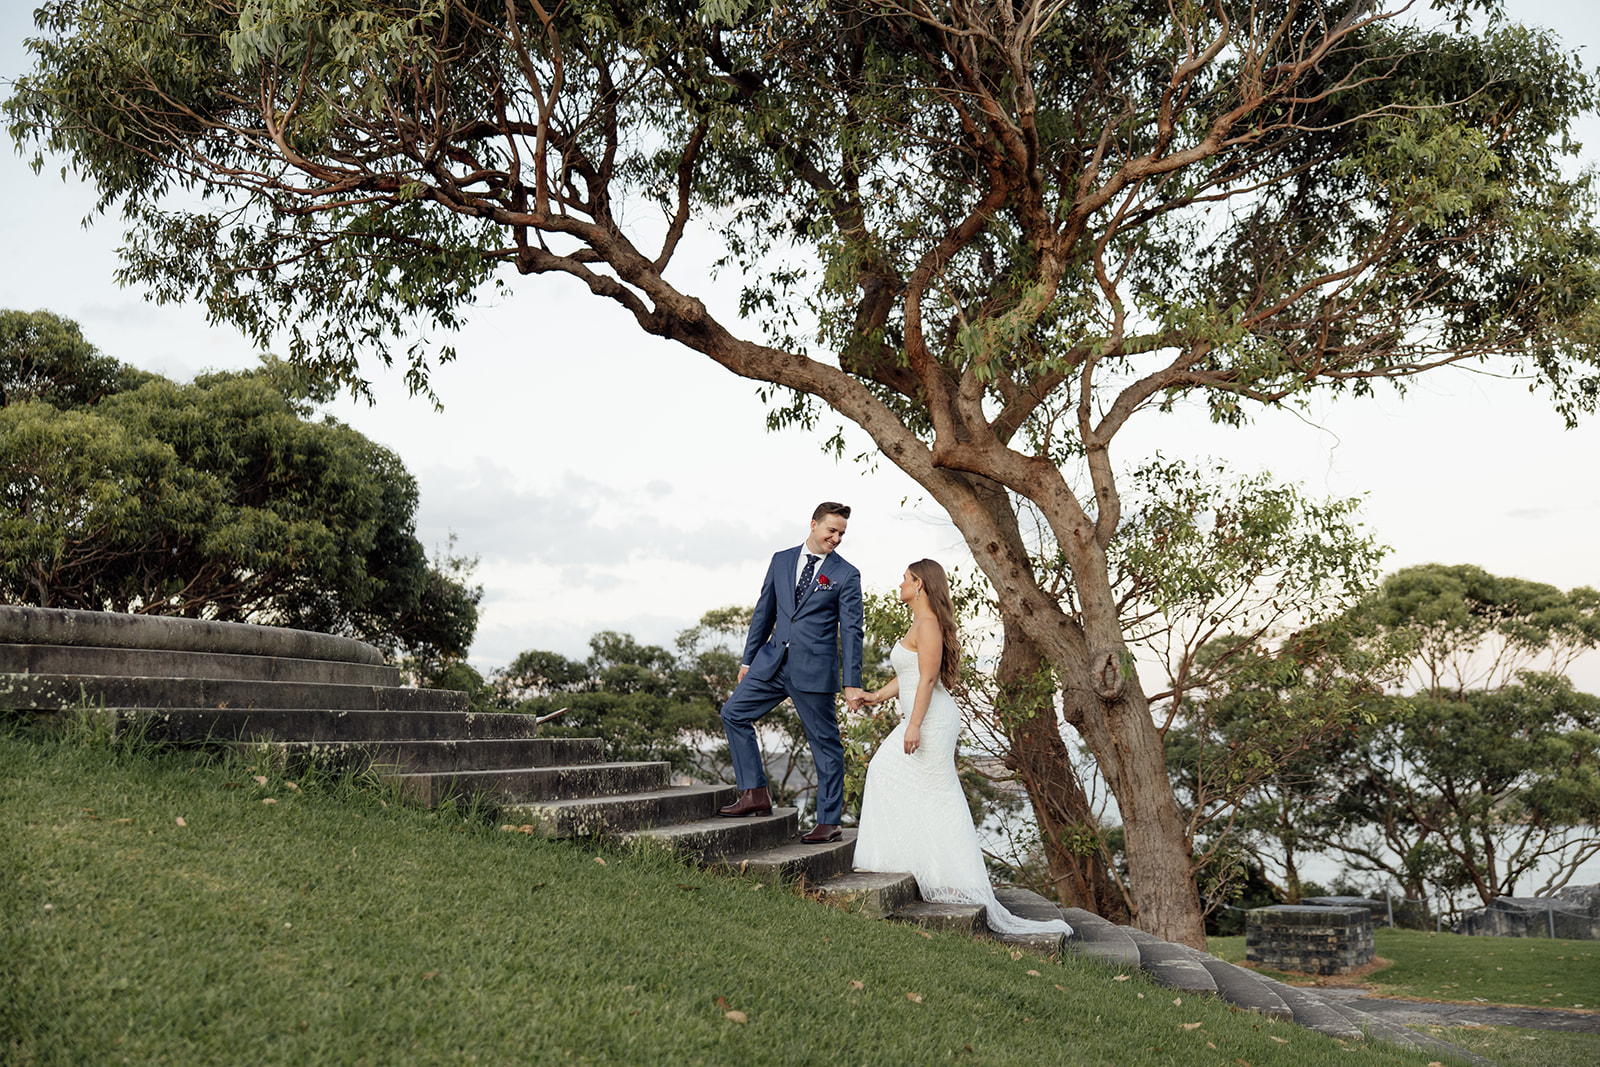 A bride and groom walking up stairs outdoors